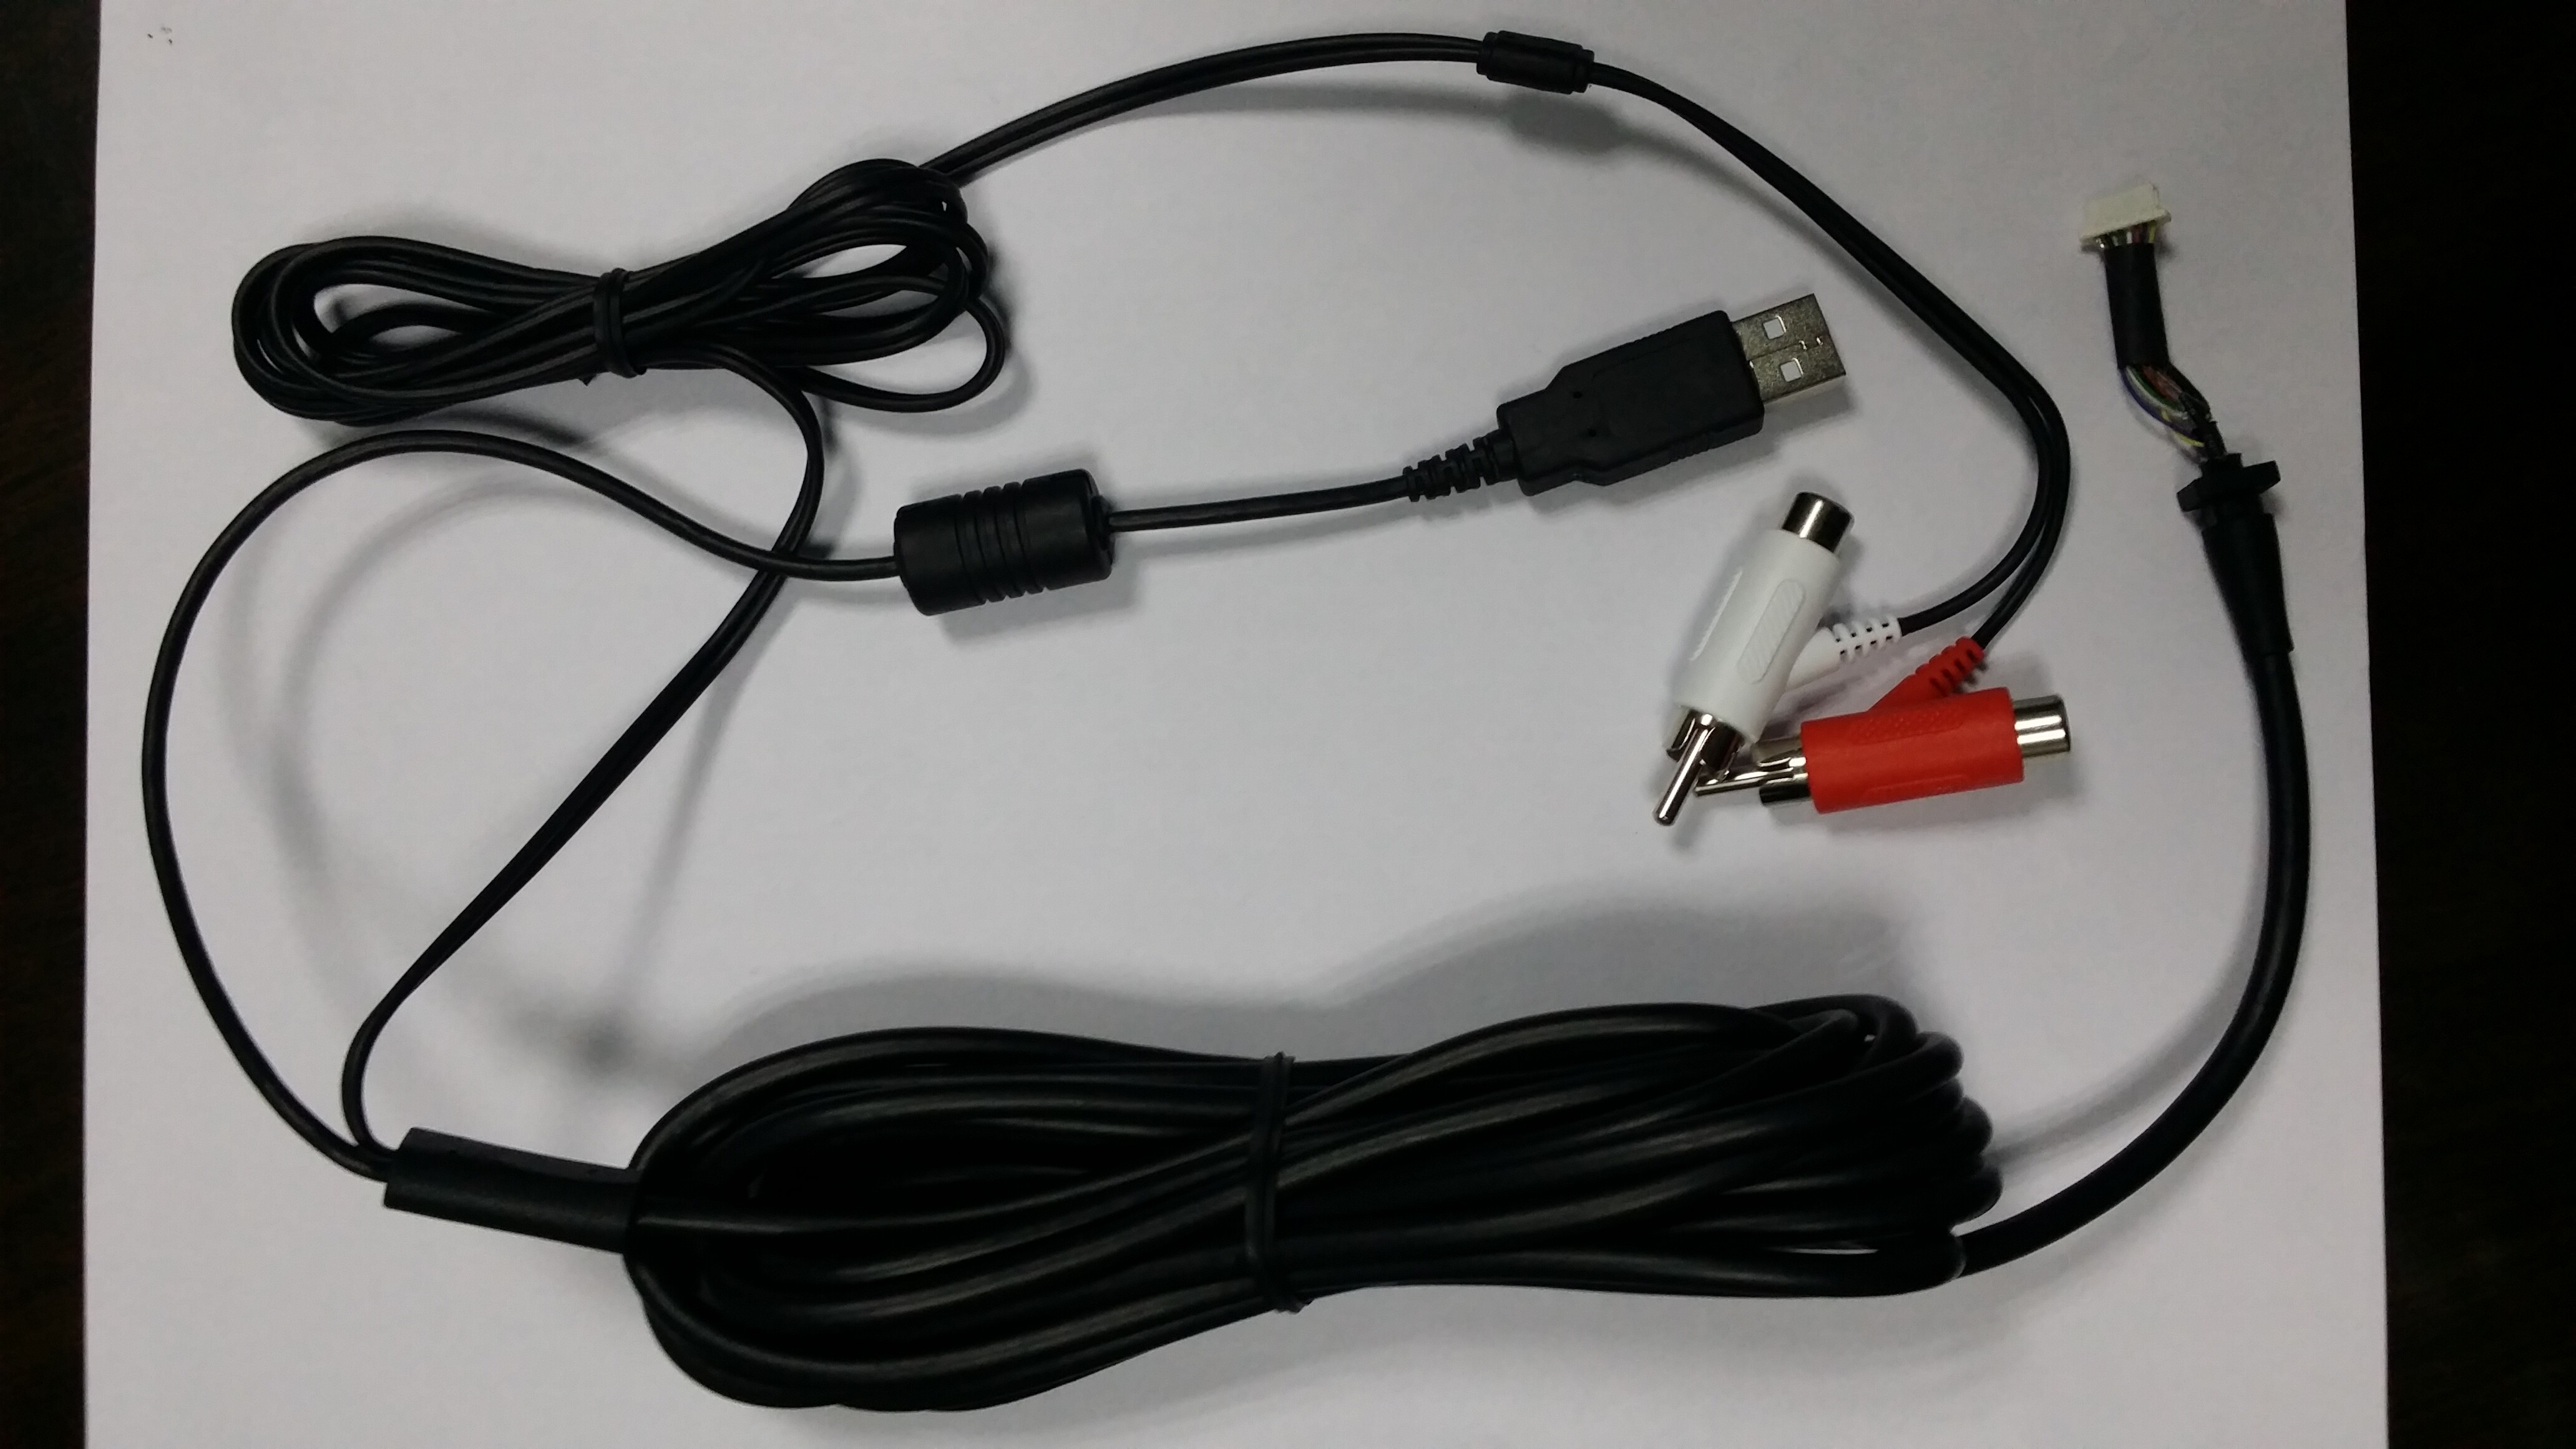 Gaming headphone cable